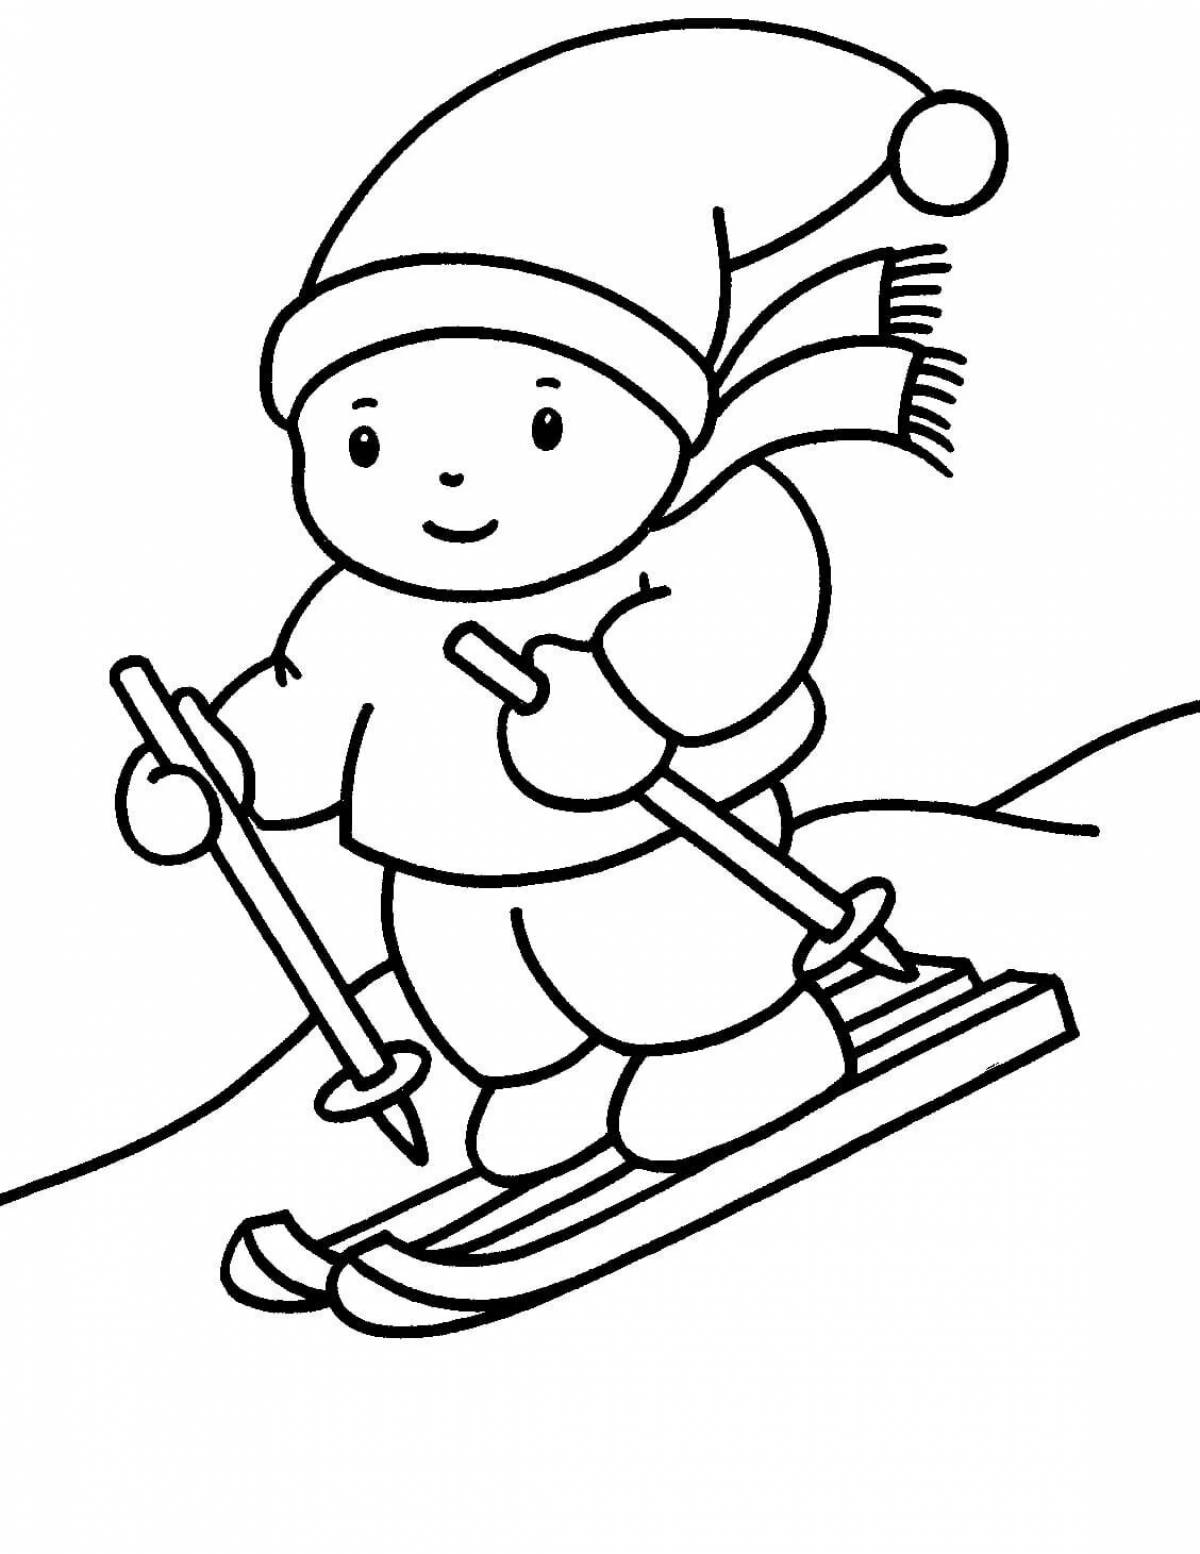 Fun skier coloring book for kids